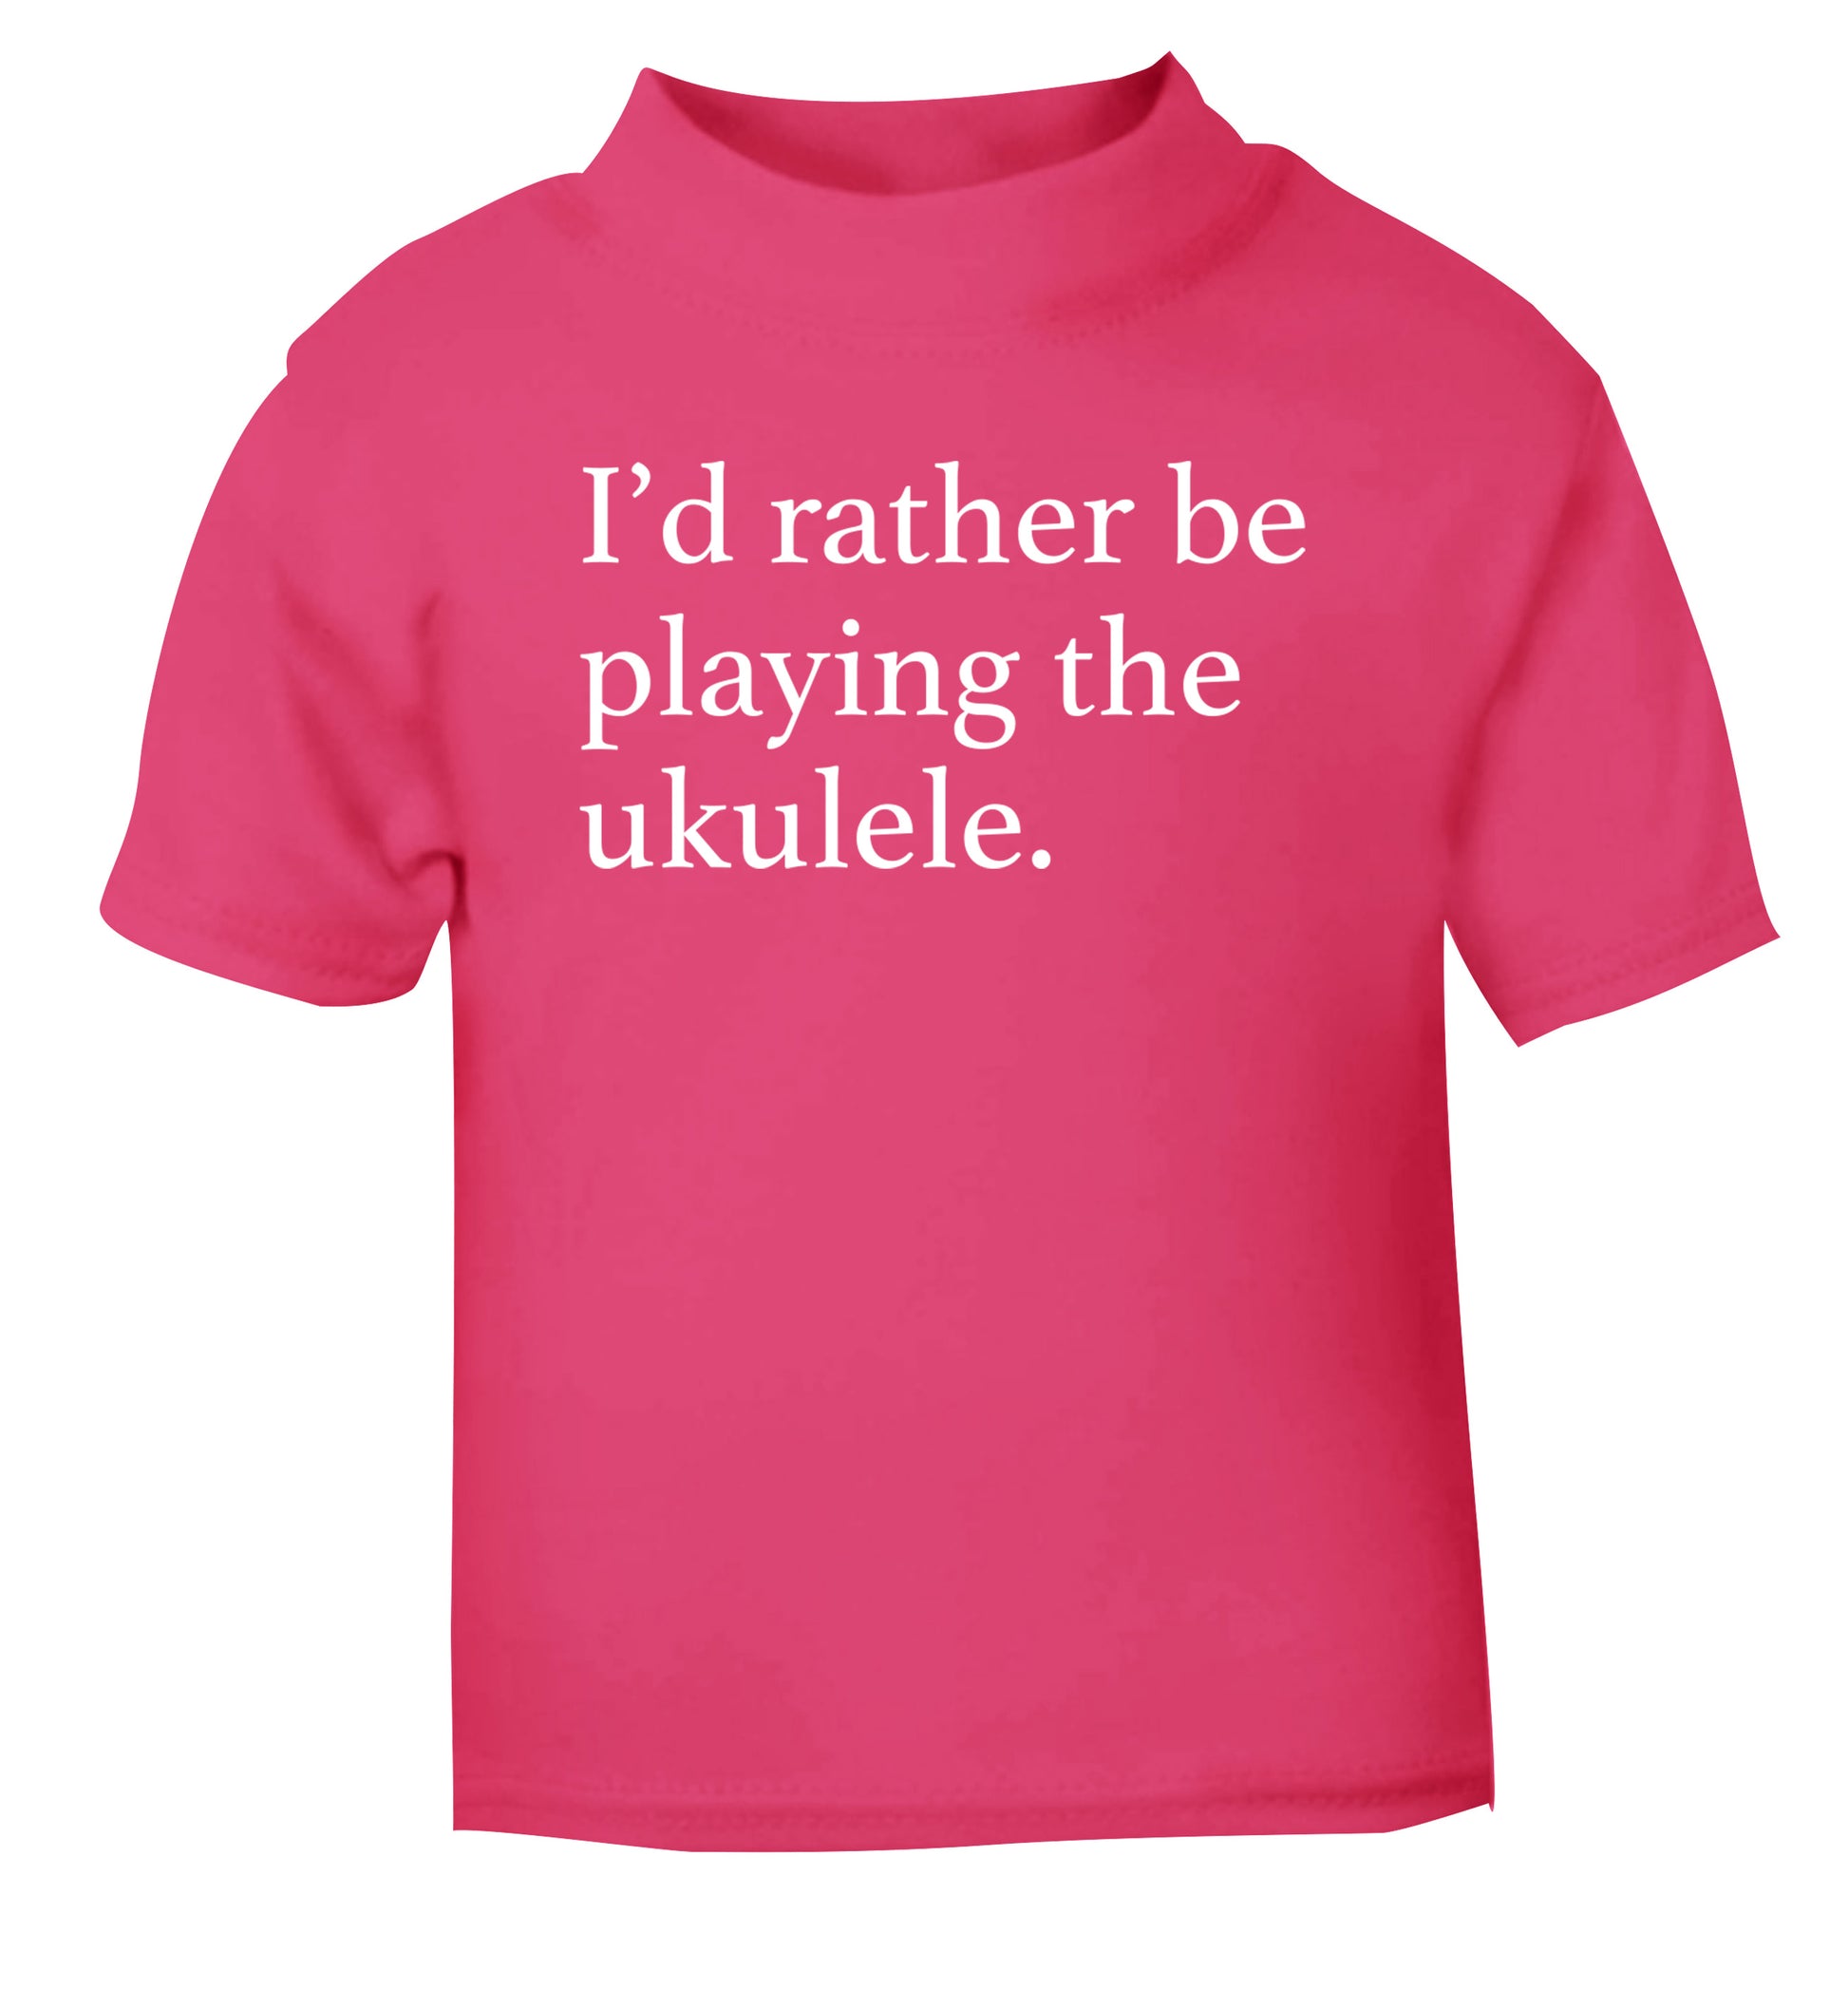 I'd rather by playing the ukulele pink Baby Toddler Tshirt 2 Years